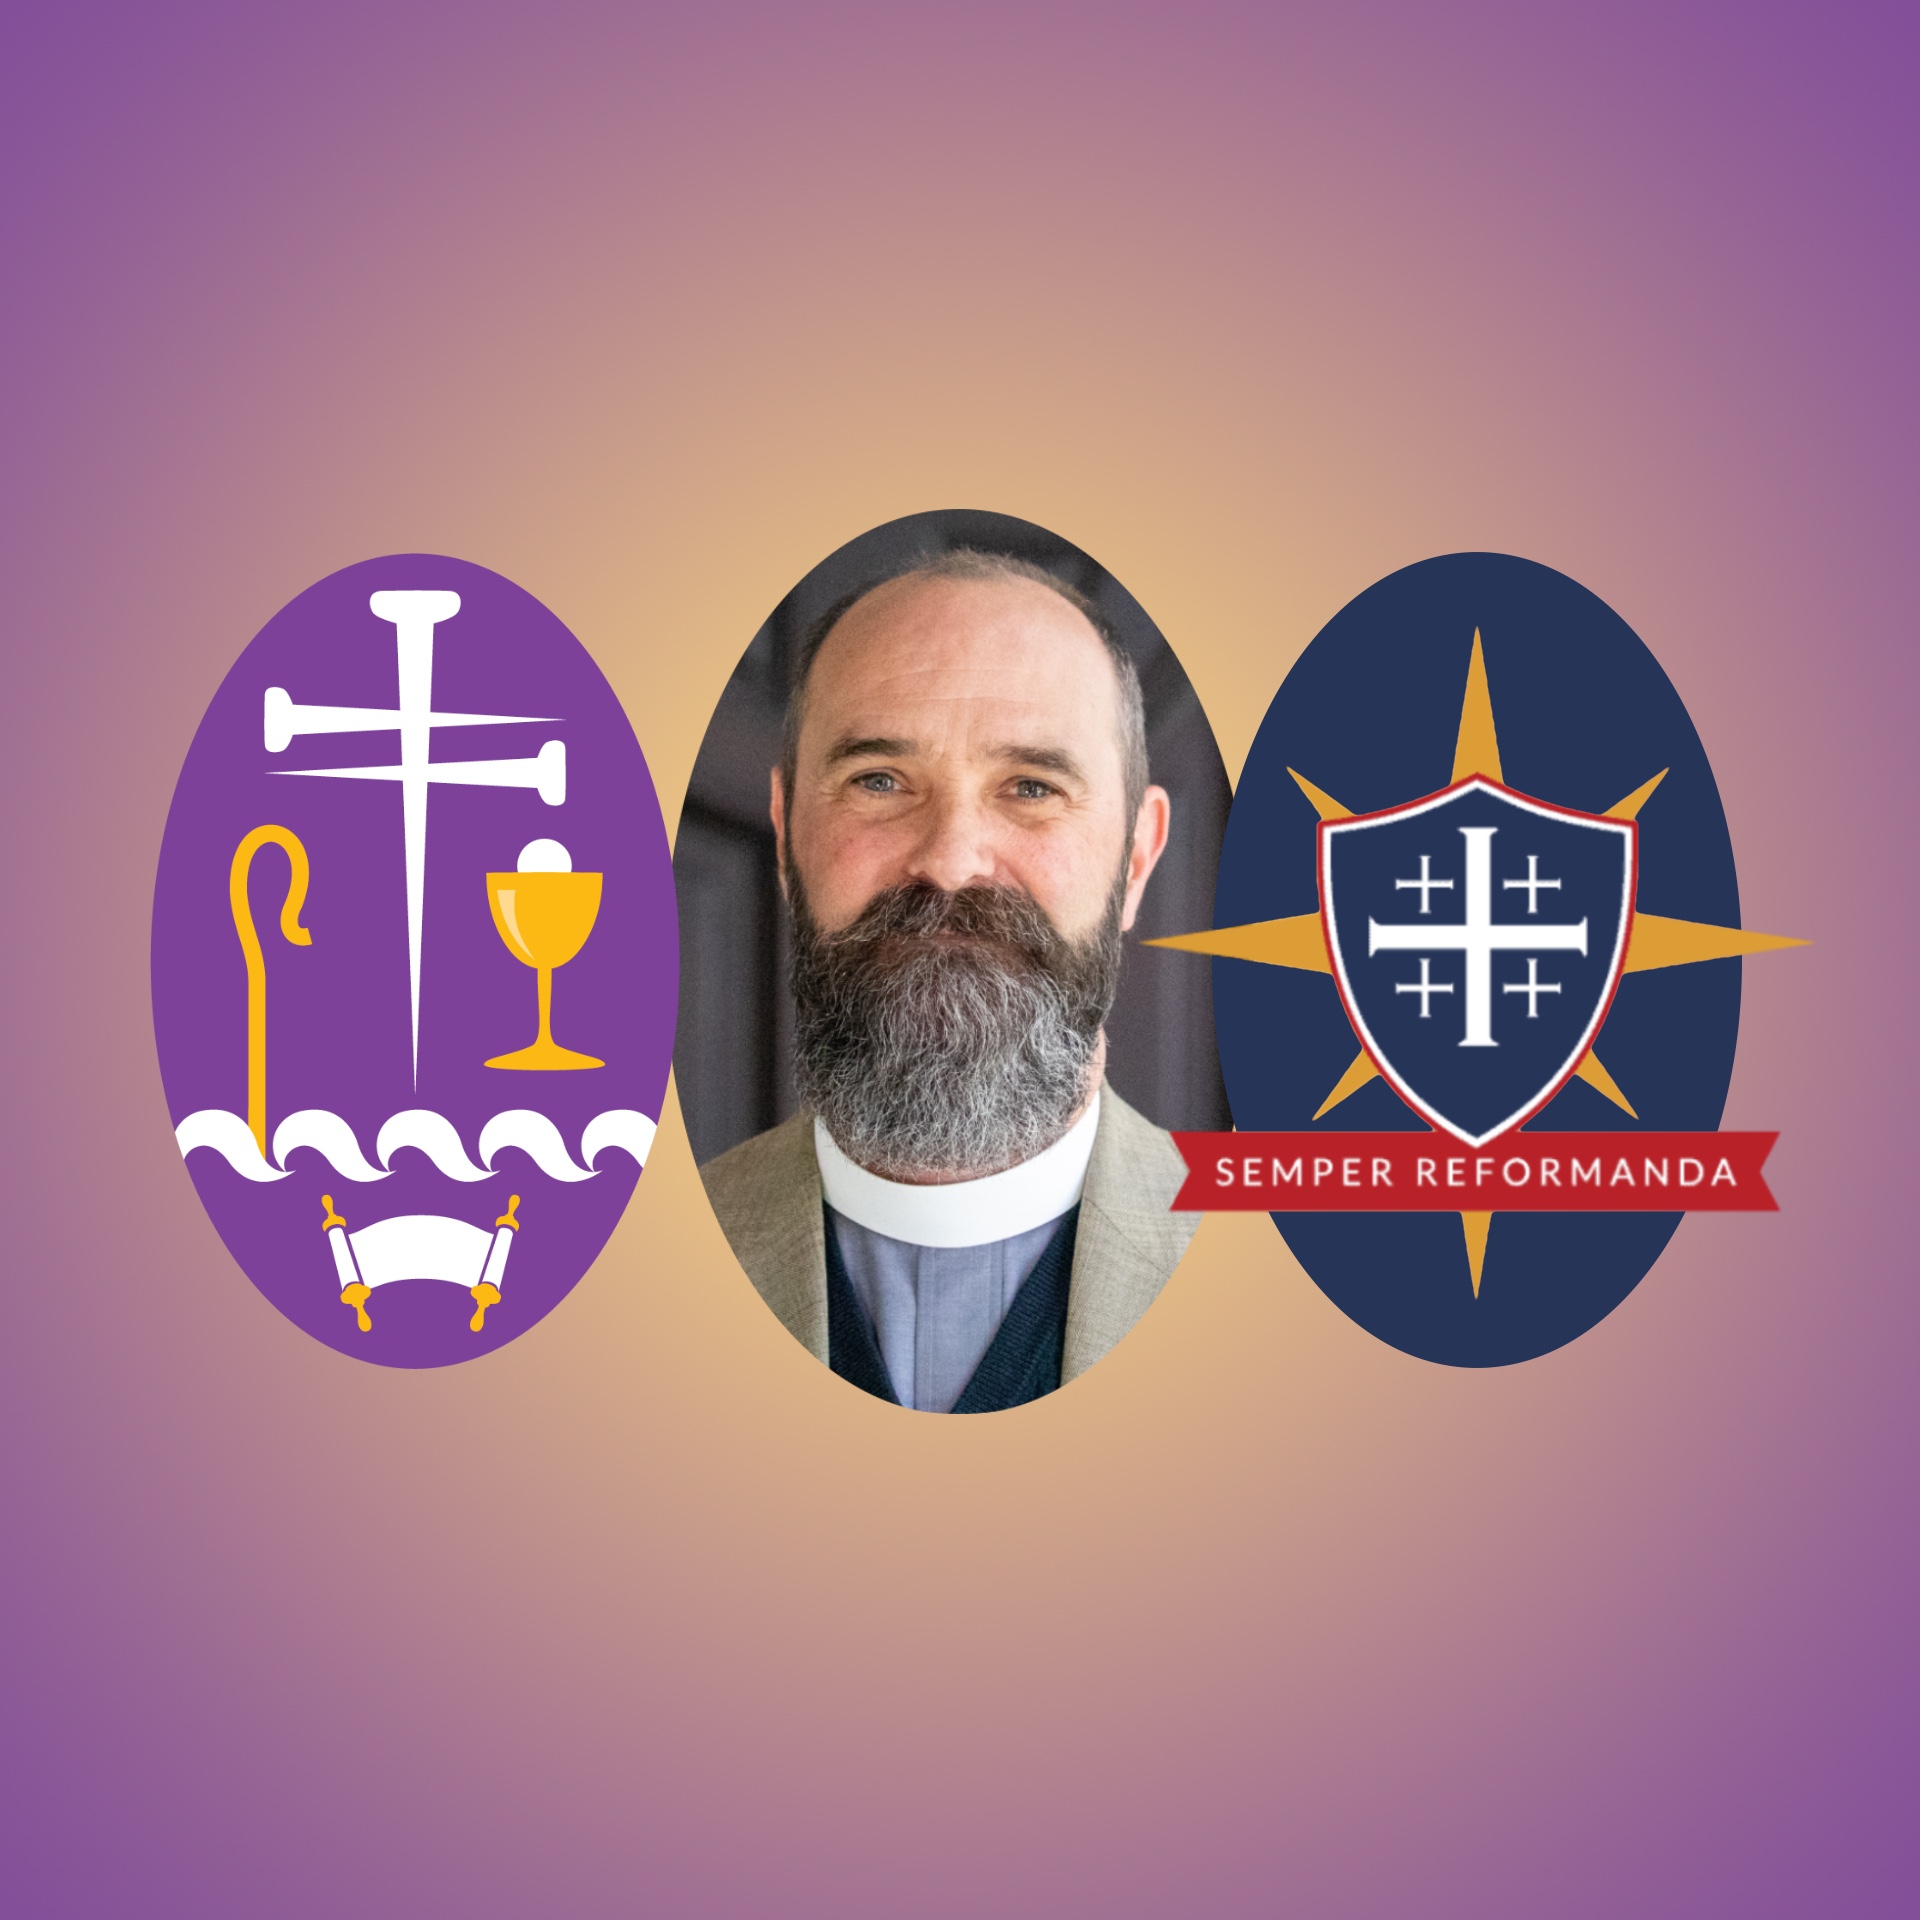 Featured image for “Mark Eldredge Appointed COO of American Anglican Council”